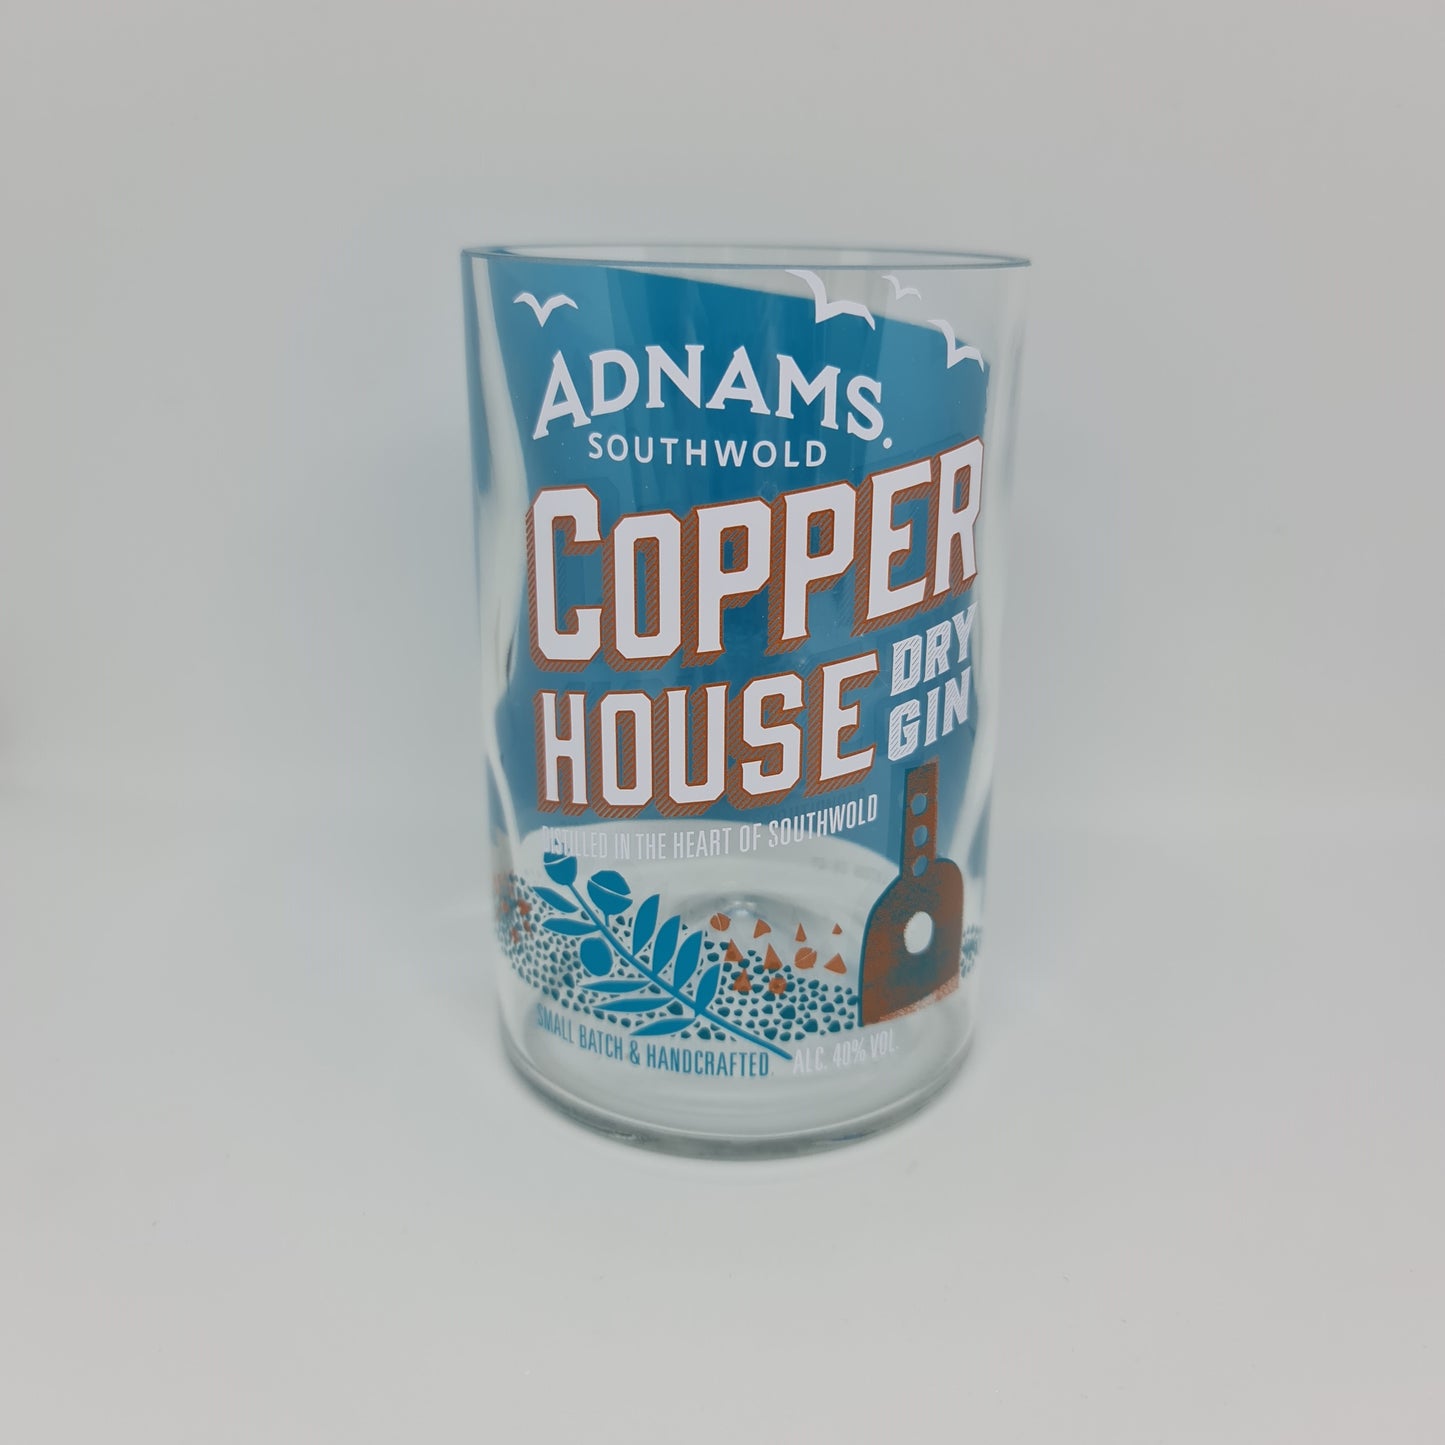 Adnam's Copper House Gin Bottle Candle